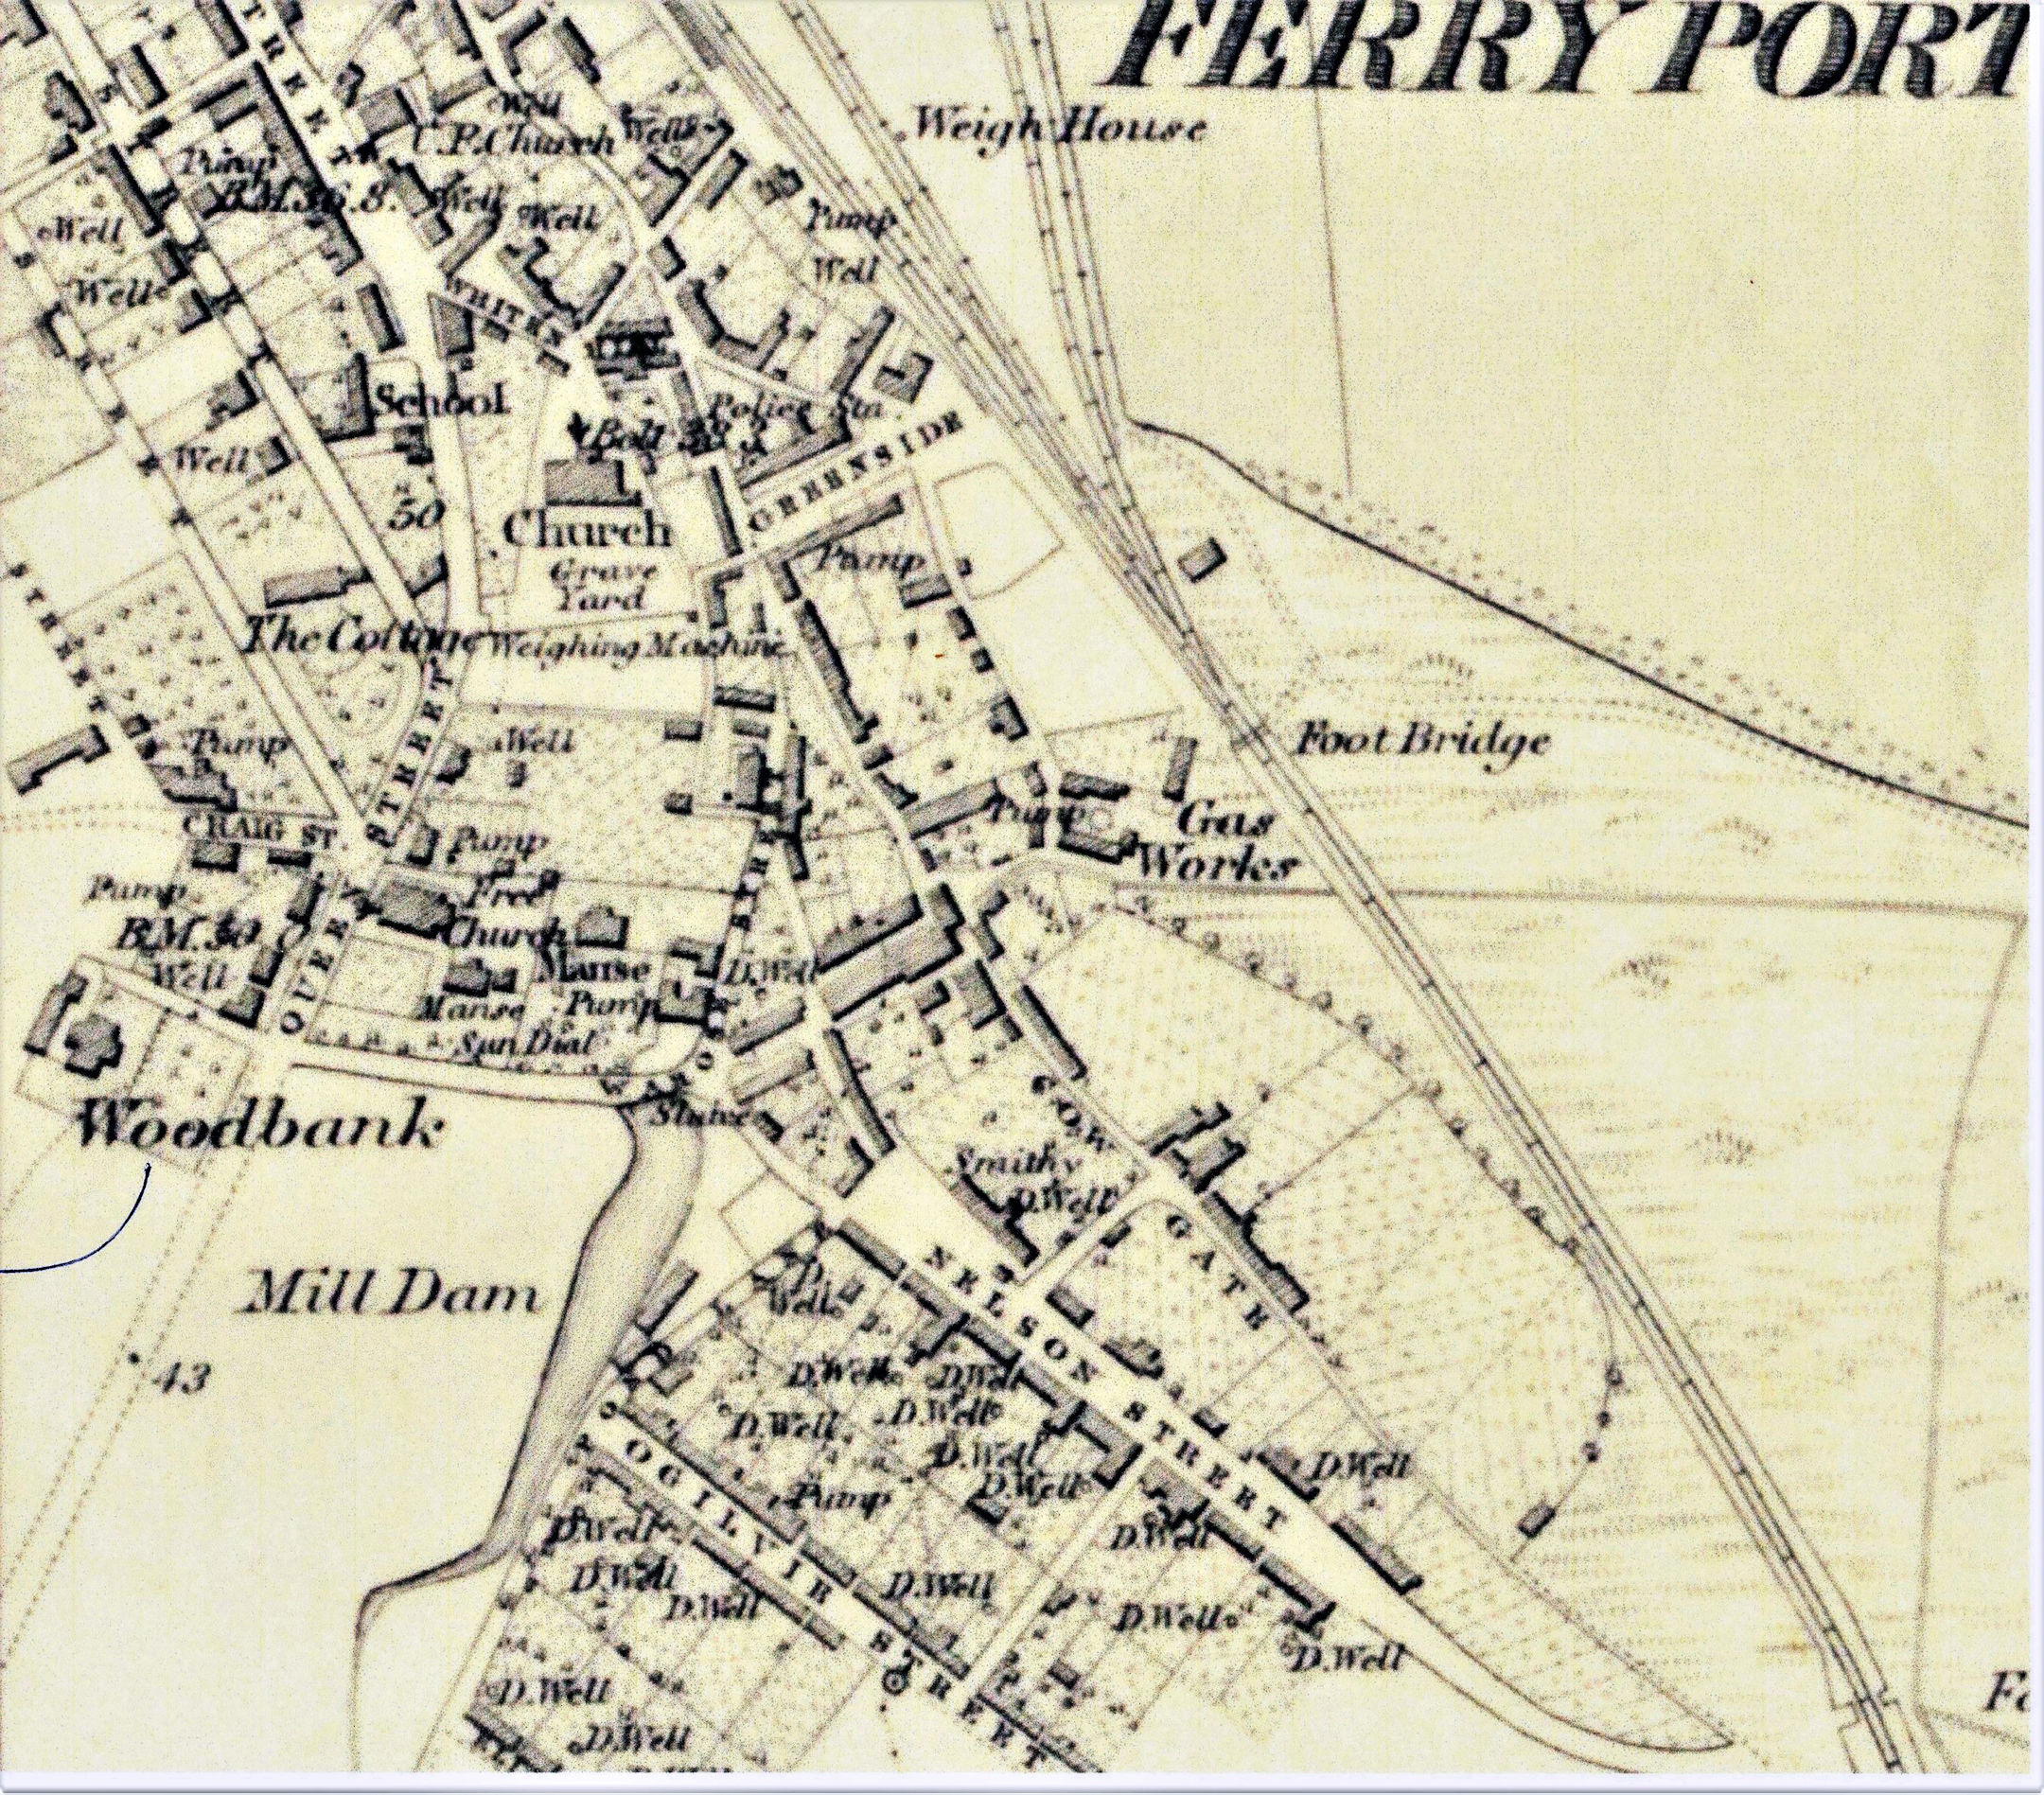 Tayport Heritage Trail - Board 22 - Extract from OS 1855 map prior to new public school